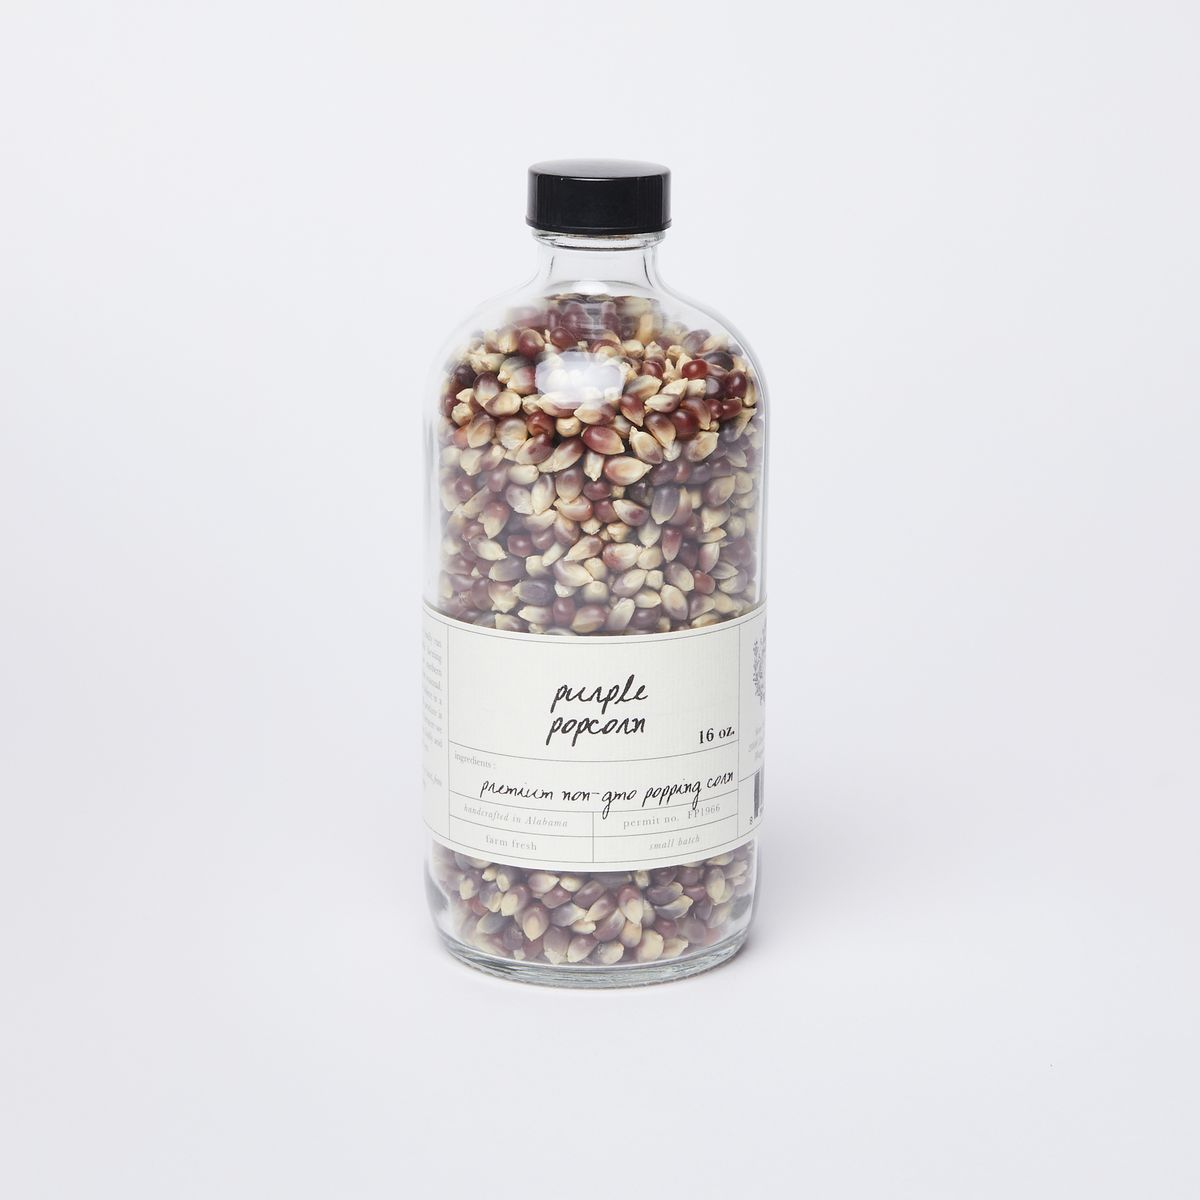 A clear glass bottle full of purple and white popcorn kernels with a black lid and a white label that reads "Purple Popcorn"